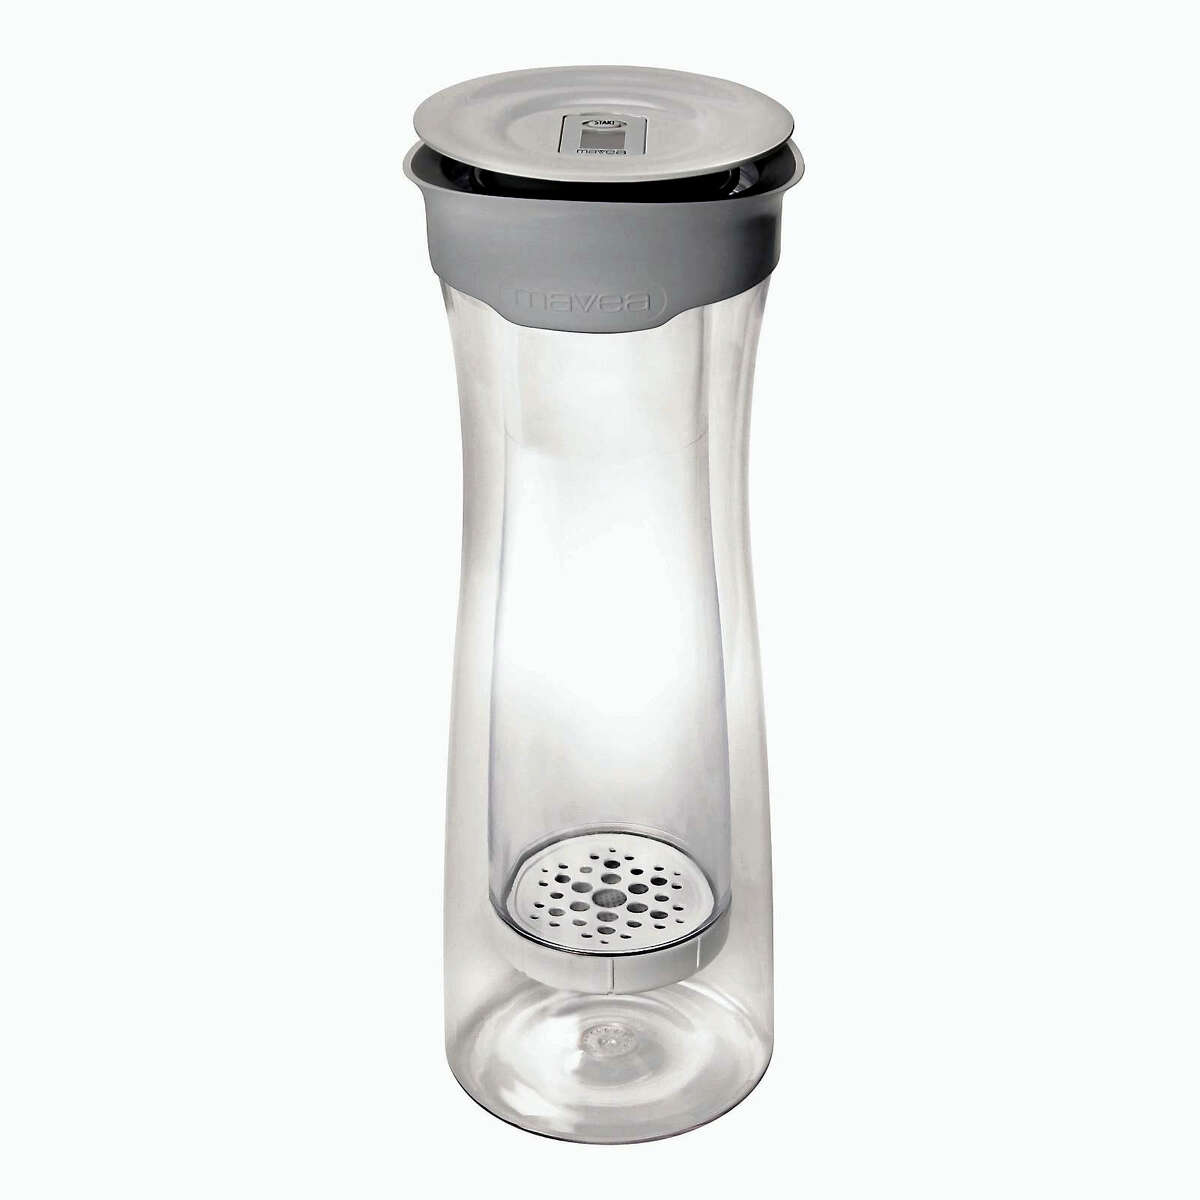 The Mavea Water Filter Carafe is sleek, stylish and convenient.